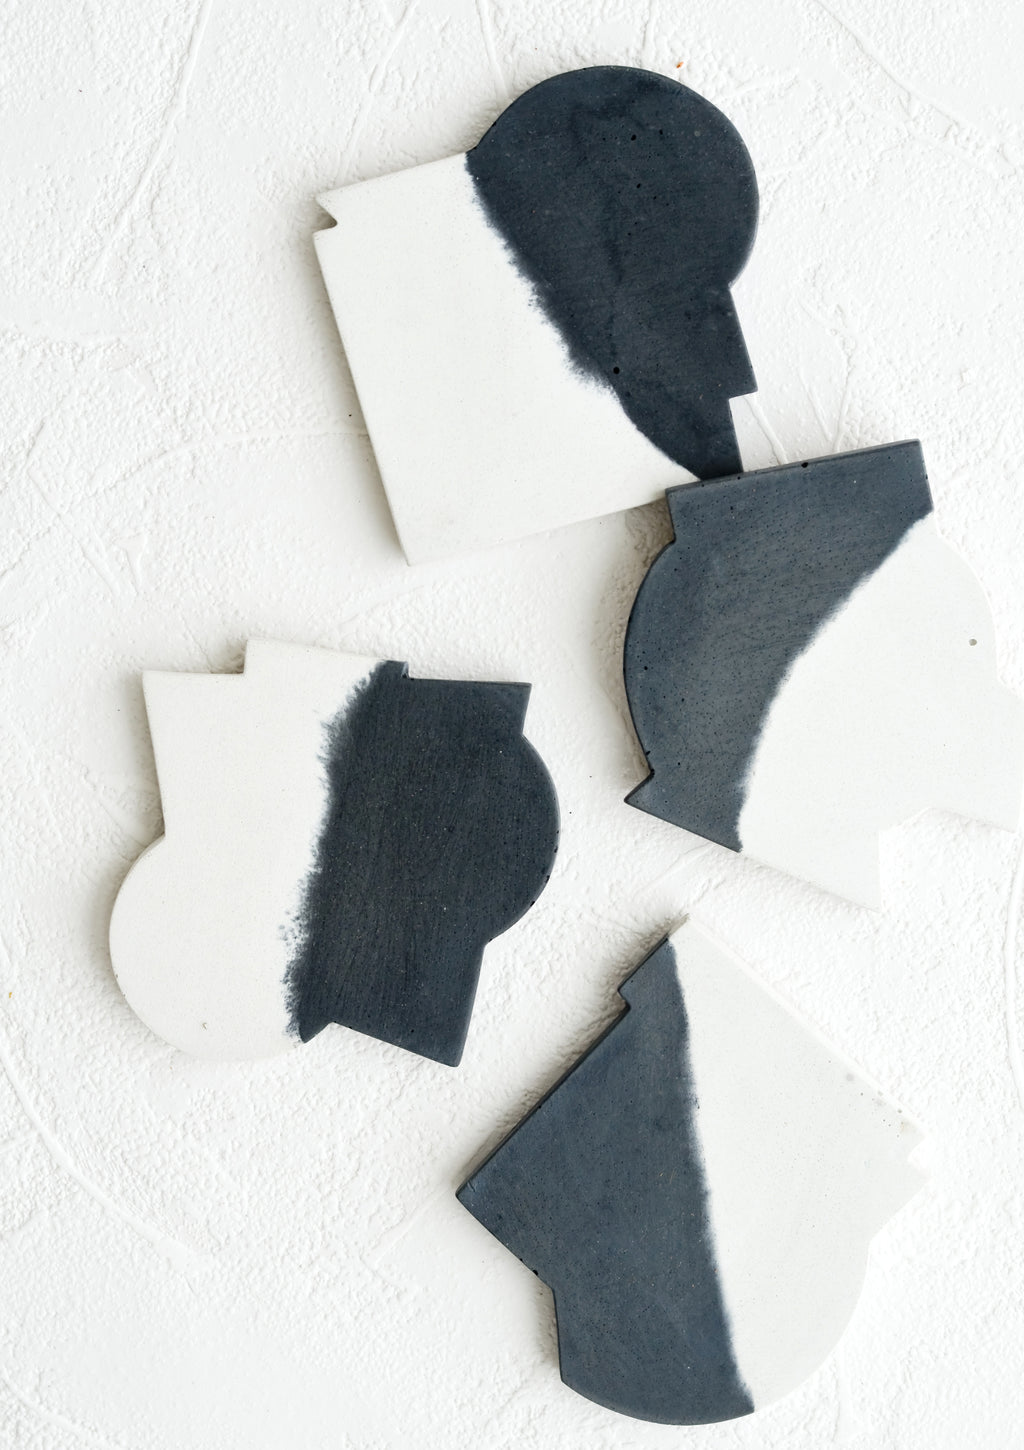 Black & White: Four concrete coasters in black & white color with unique abstract shapes.